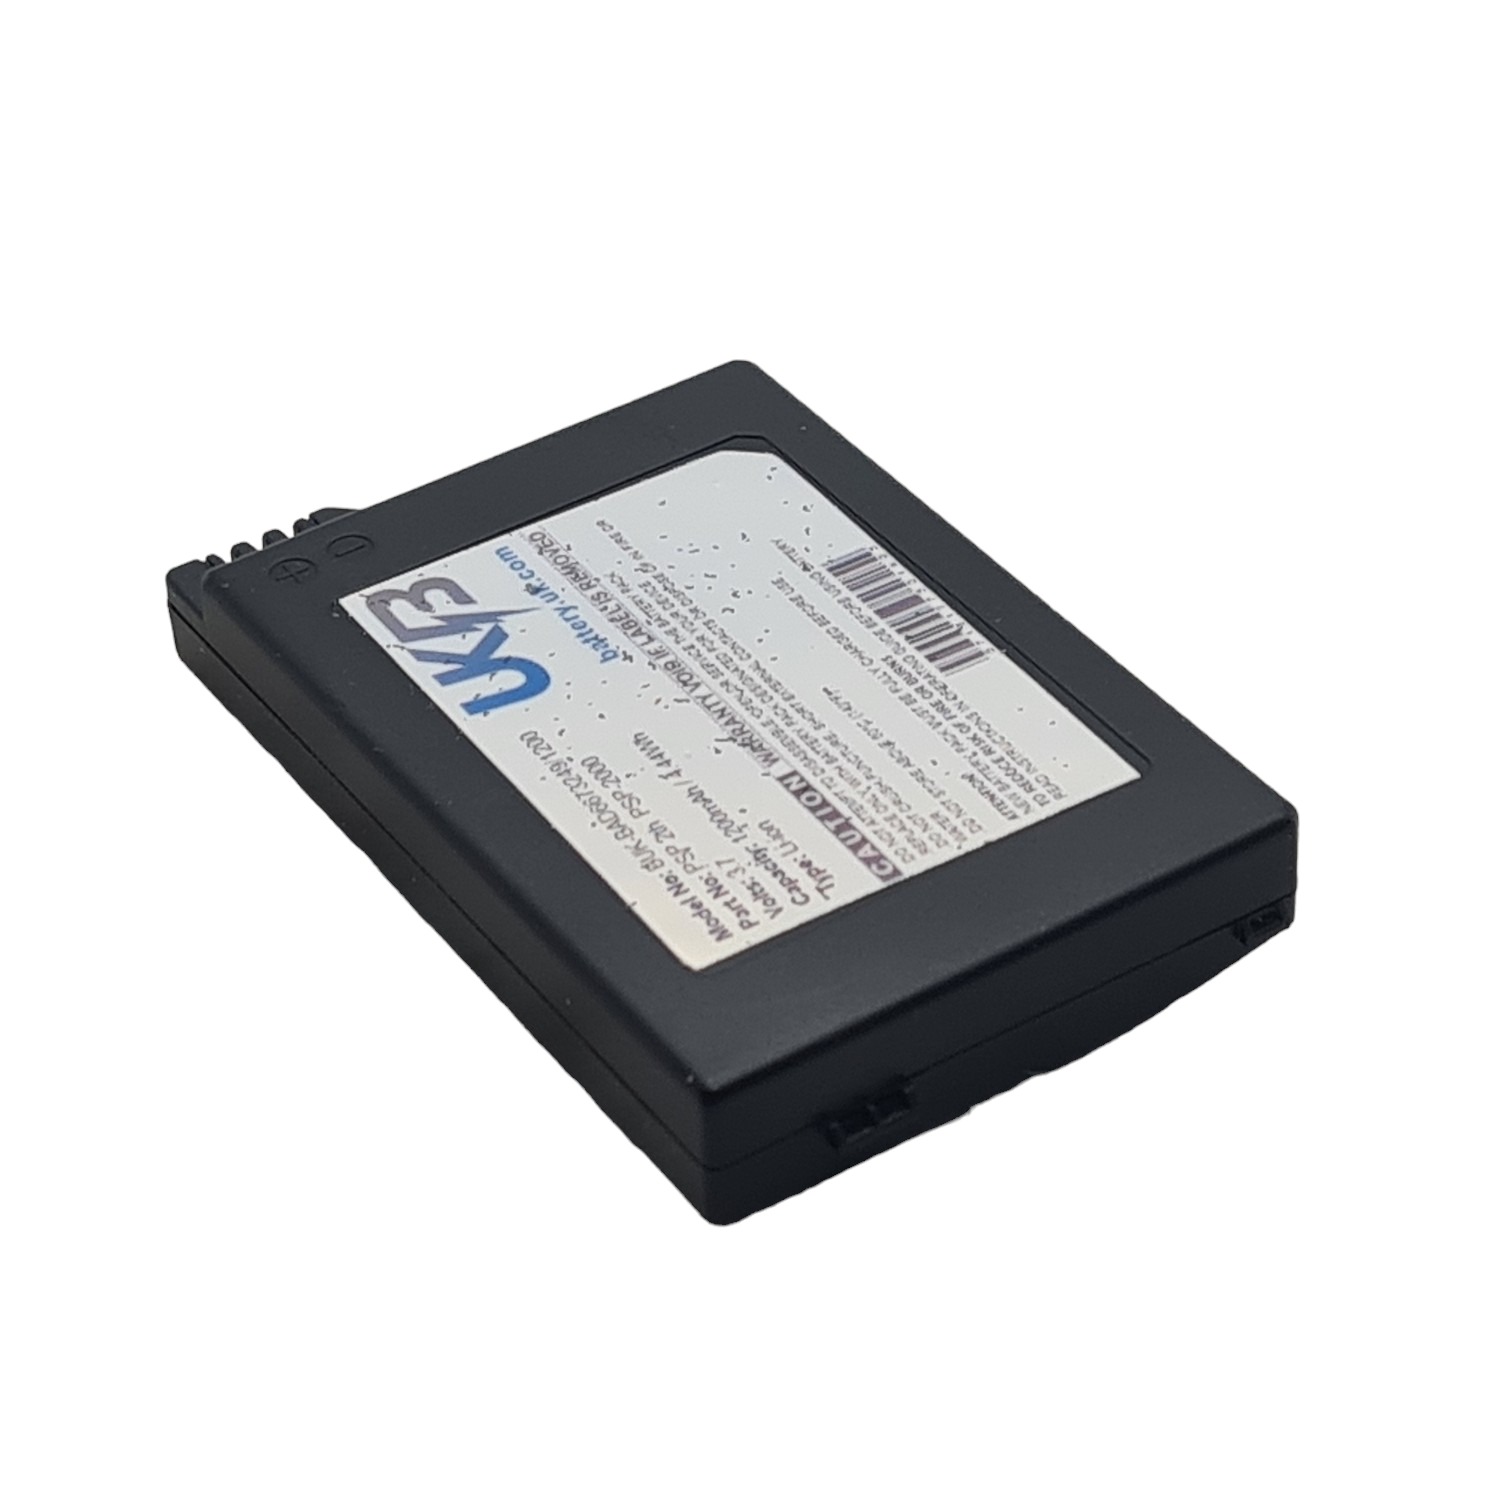 Sony PSP-S110 Lite PSP 2th PSP-2000 Compatible Replacement Battery